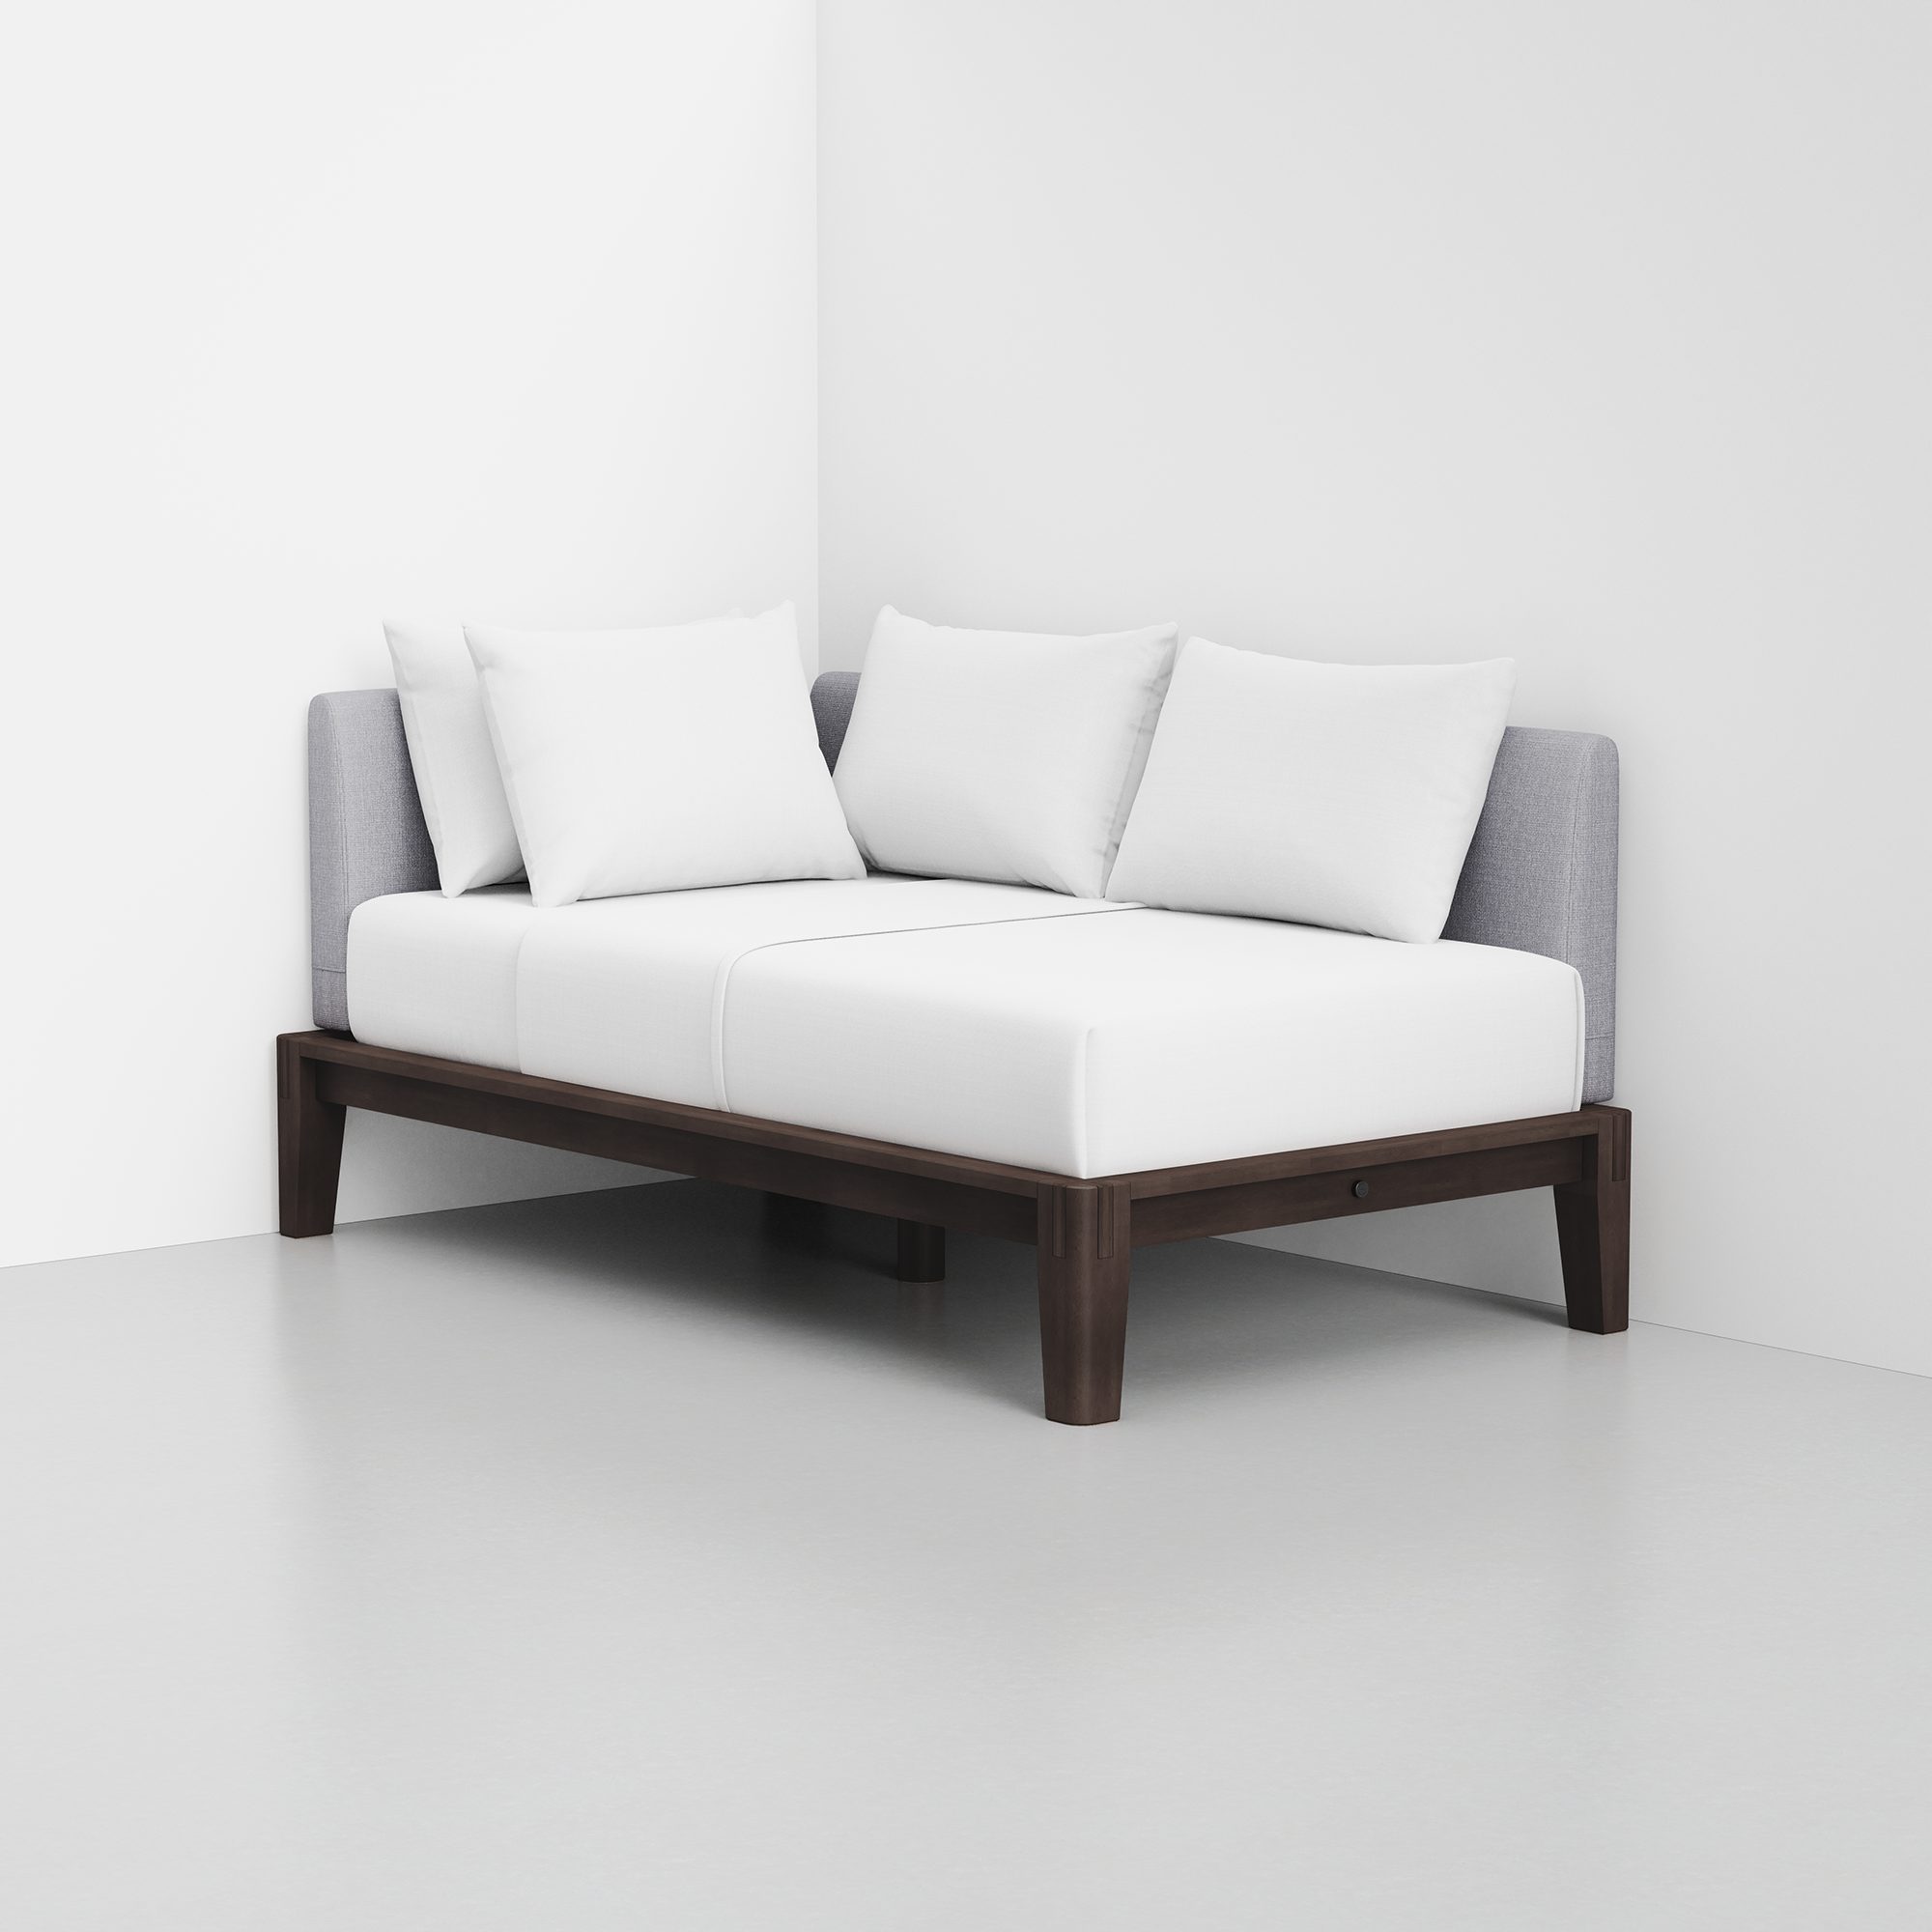 PDP Image: The Daybed (Espresso / Fog Grey) - Rendering - Pillows